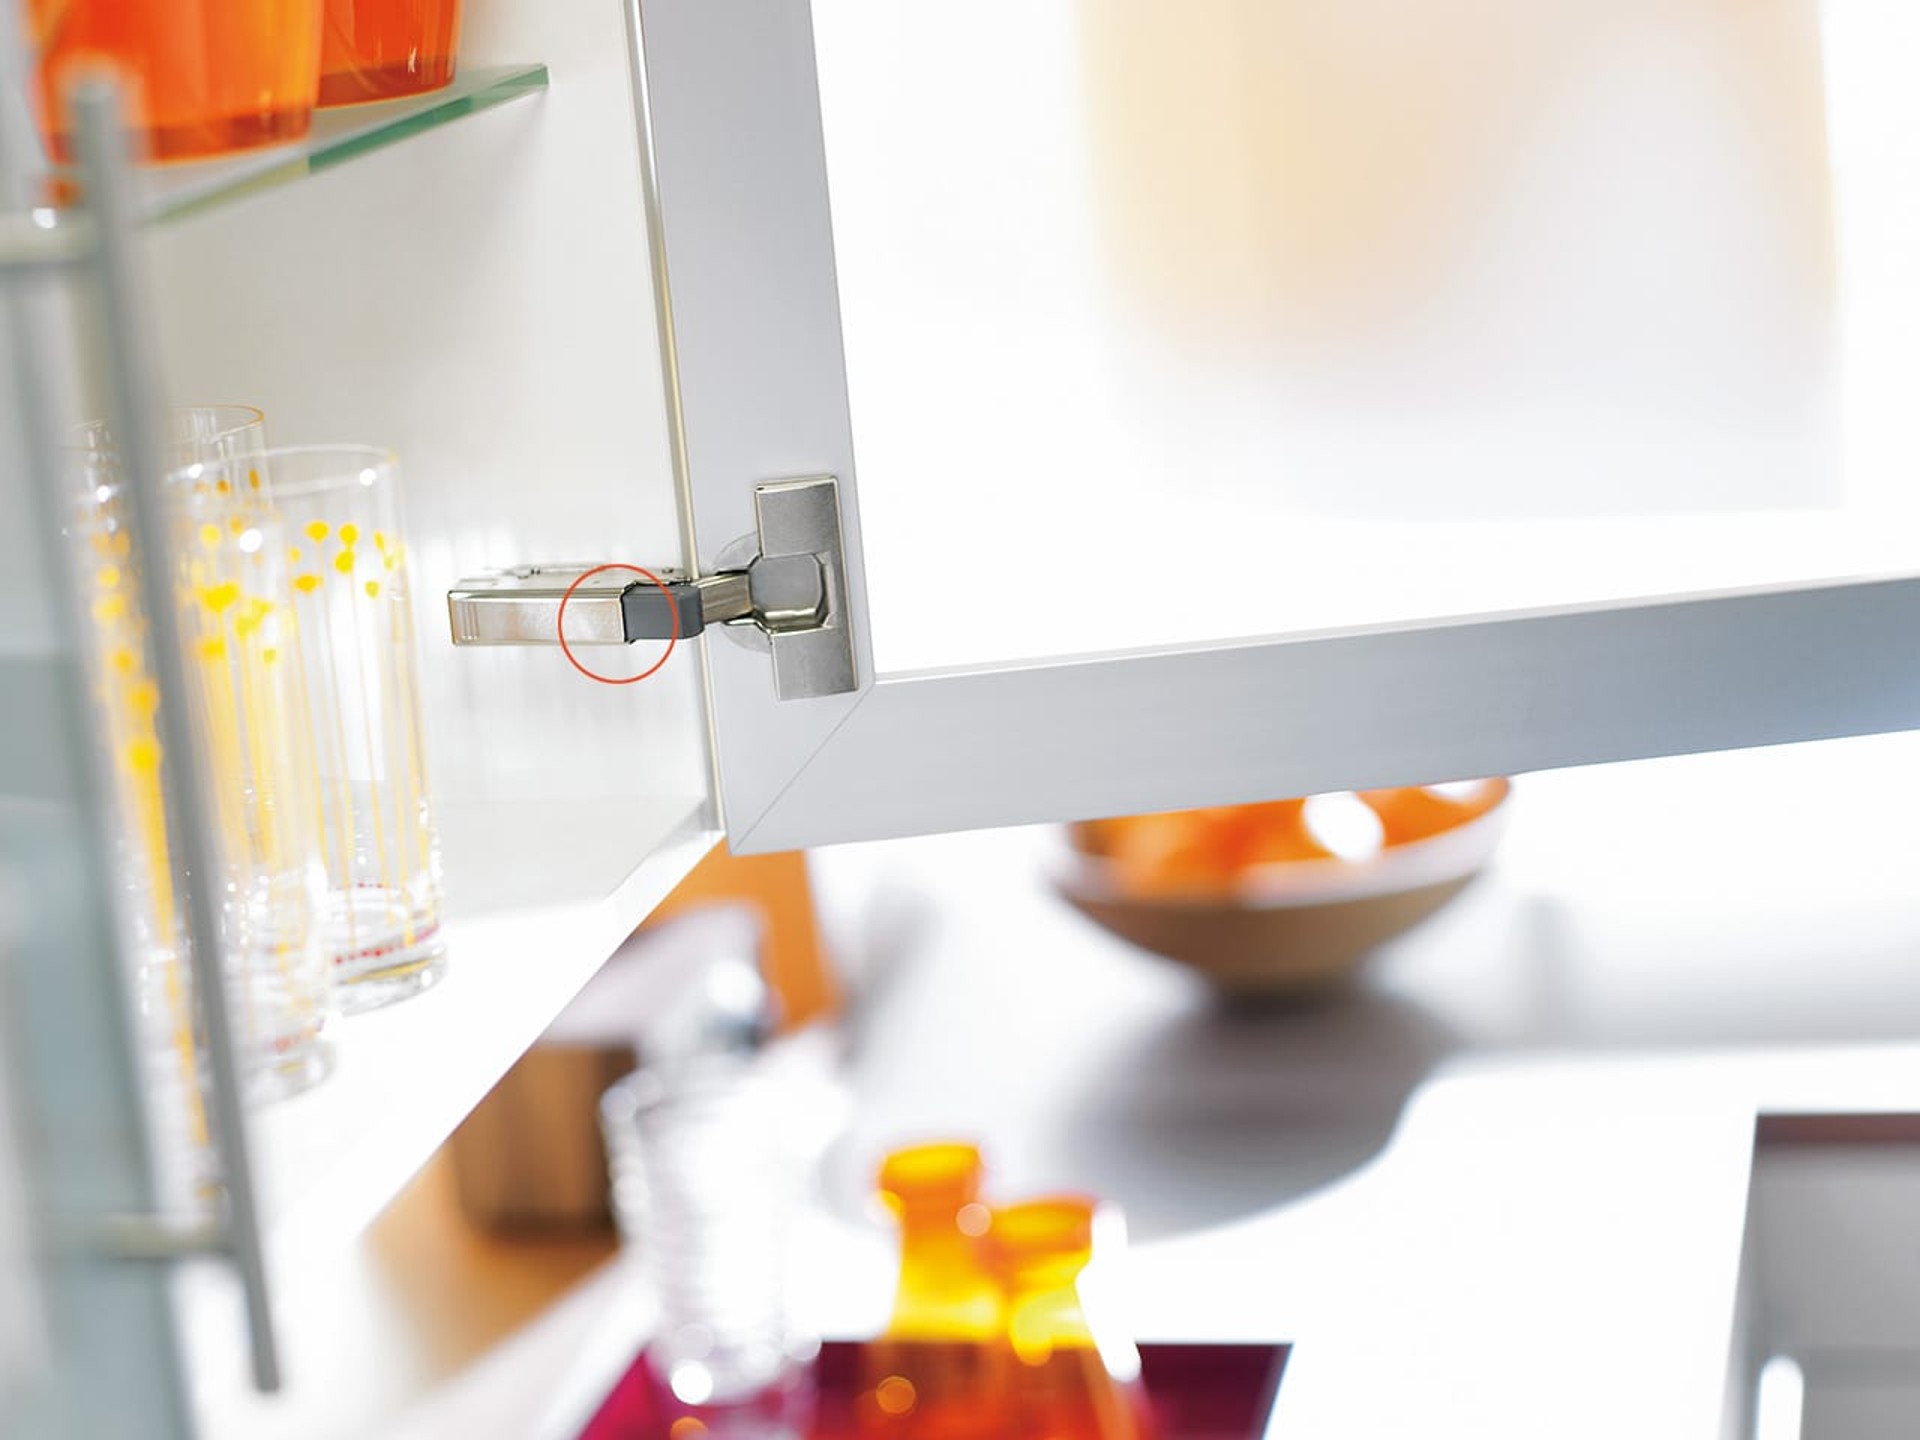 How to identify hinge systems | Blum